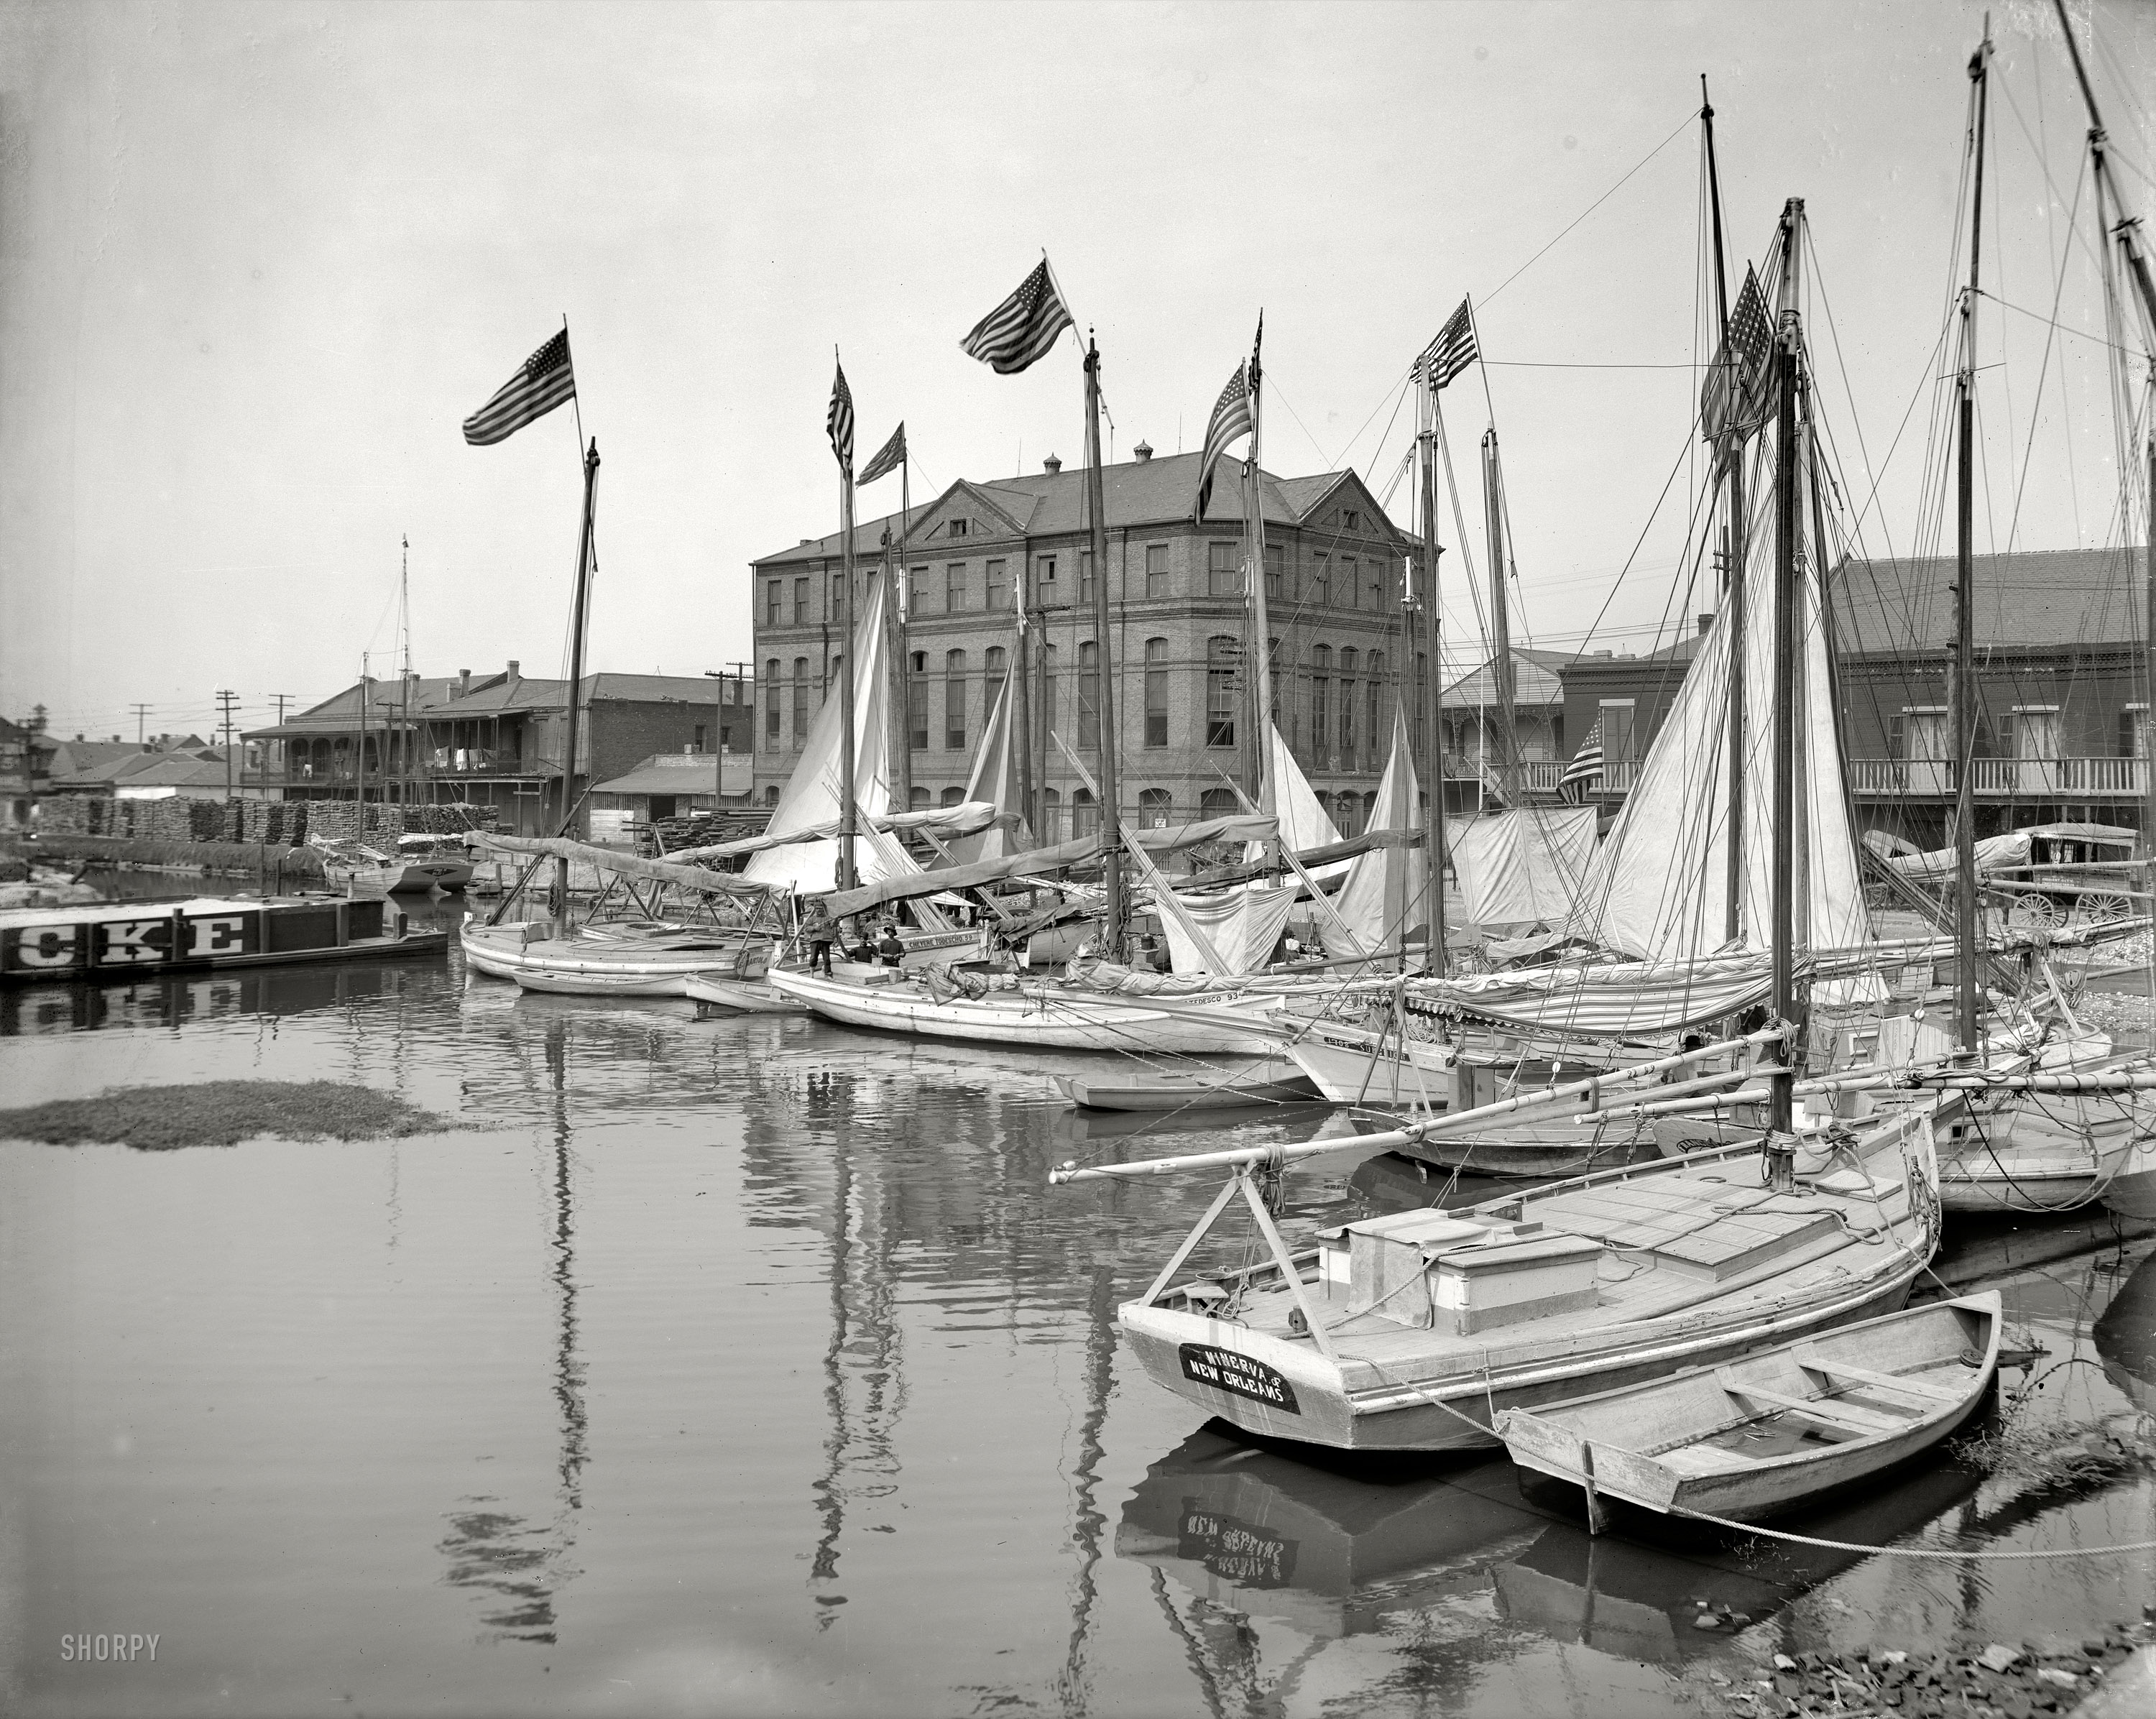 New Orleans circa 1908. "Oyster and charcoal luggers in the old basin." 8x10 inch dry plate glass negative, Detroit Publishing Company. View full size.